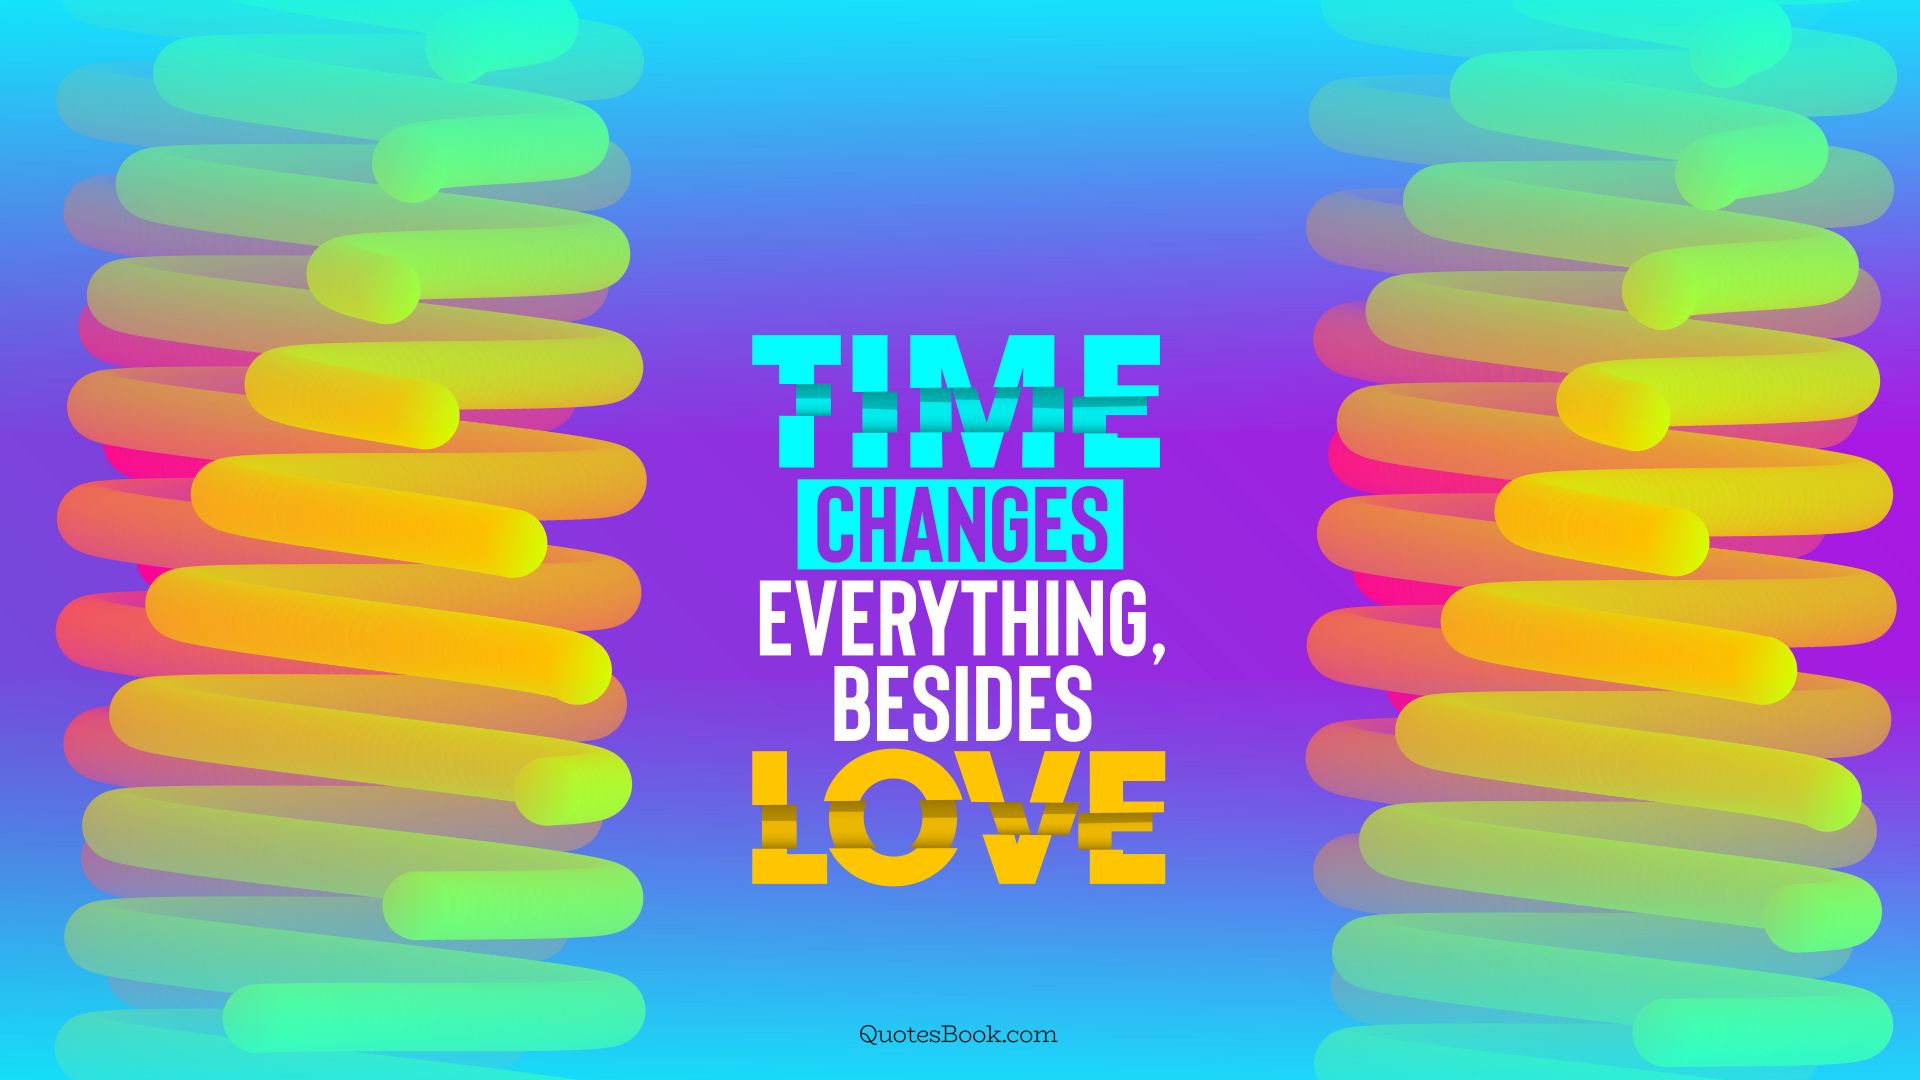 Time changes everything, besides love. - Quote by QuotesBook